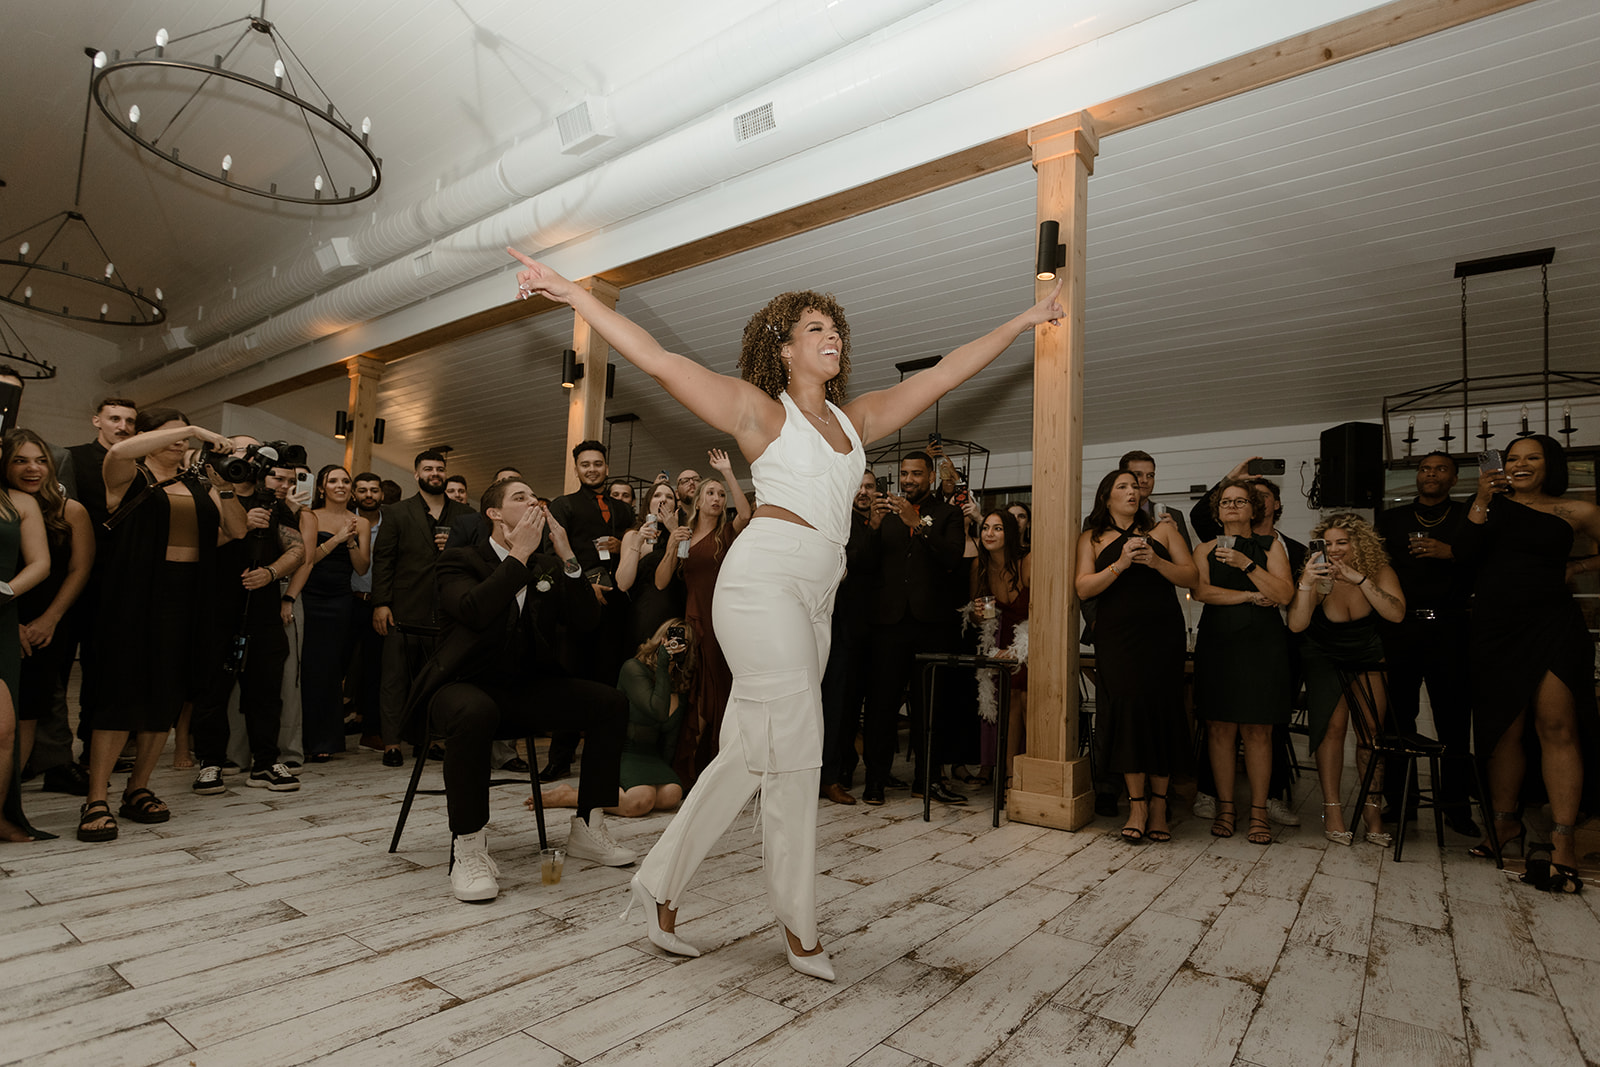 Surprise dance performance with bride for her groom in central florida